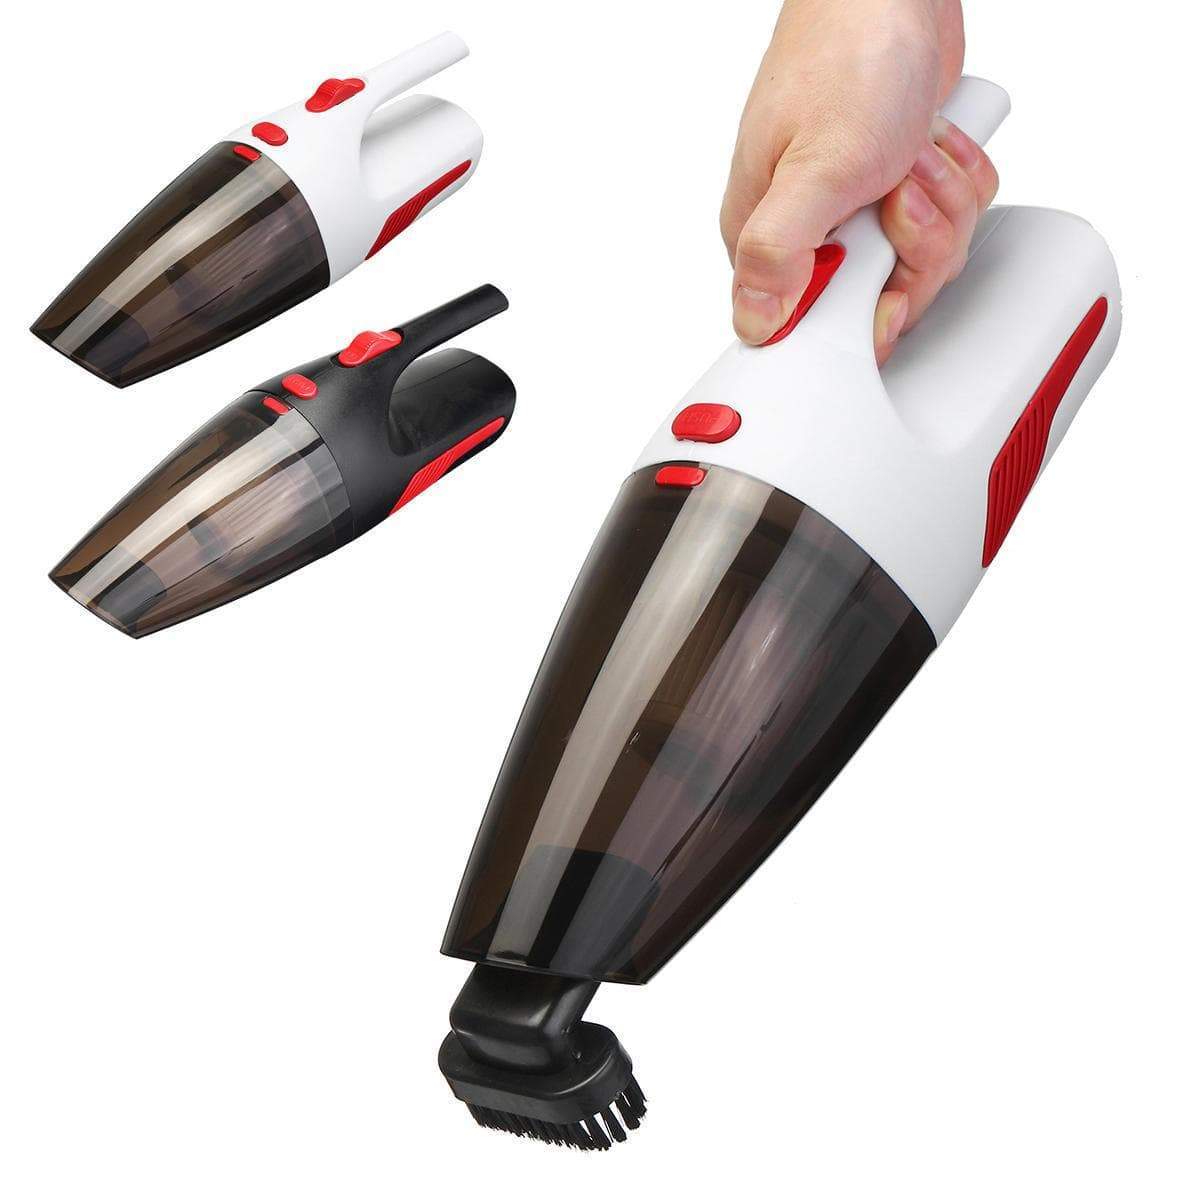 Rechargeable 120W Best Cordless Handheld Car & Home Vacuum Cleaner